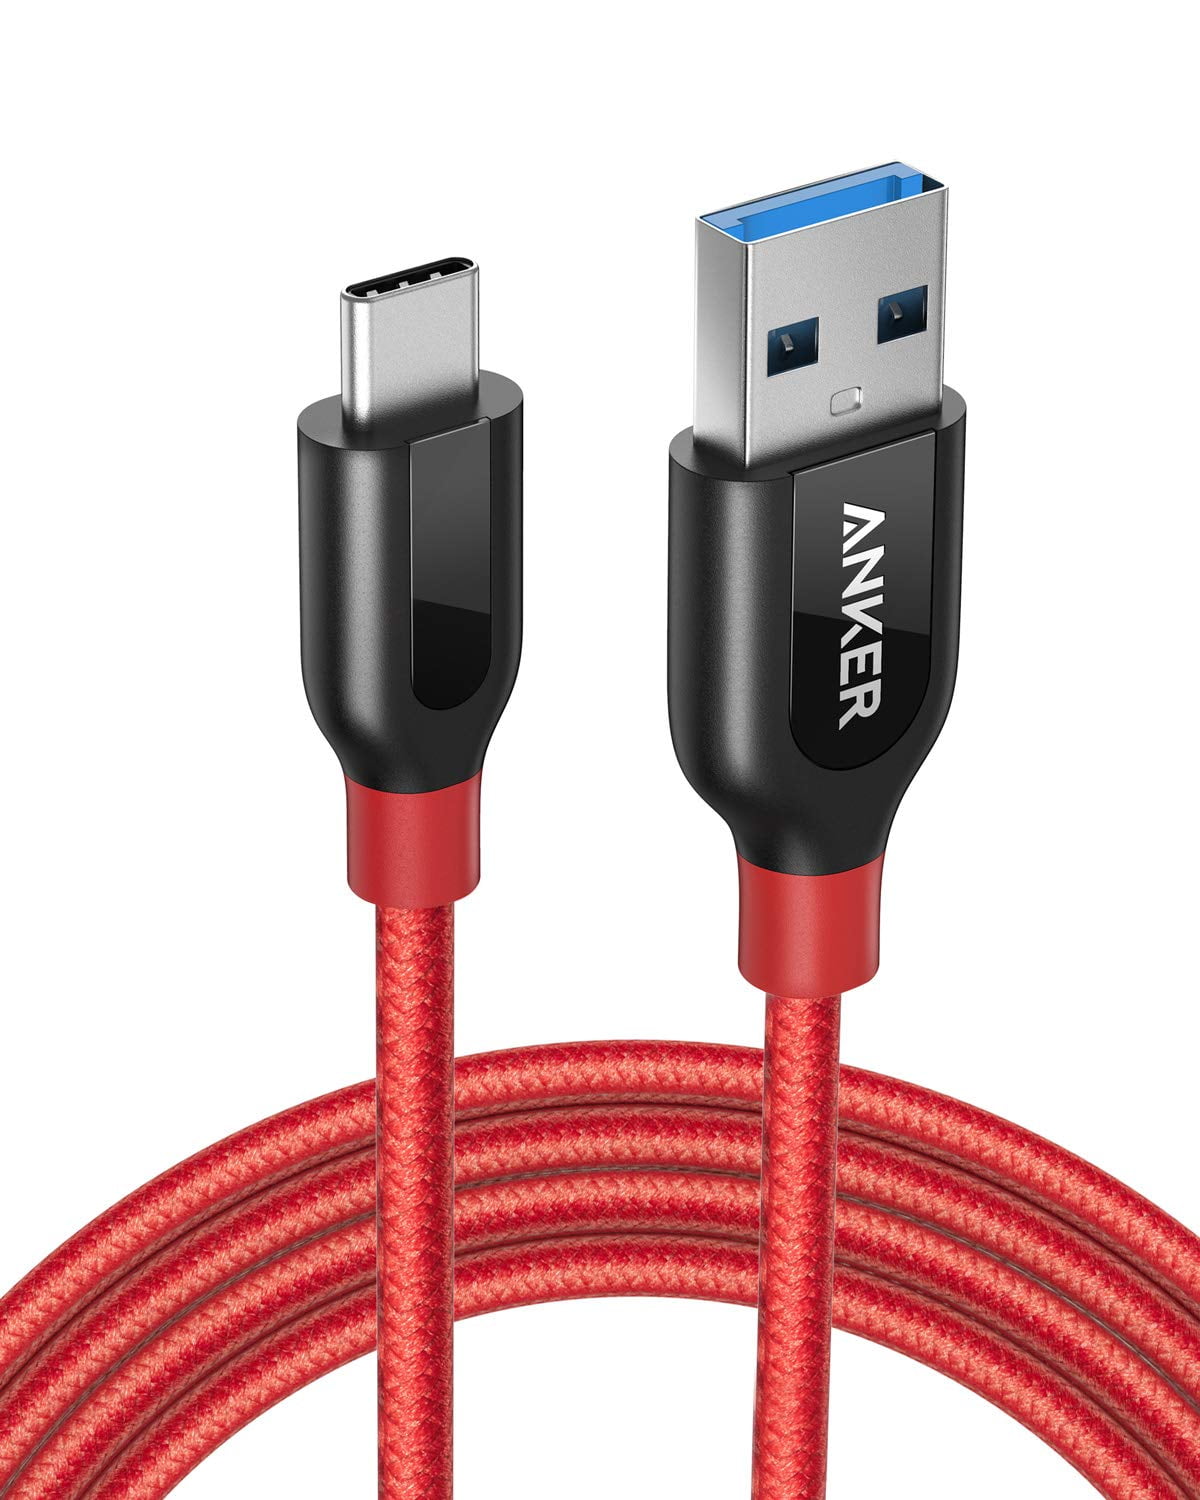 Anker Powerline+ II USB-C to USB-A Cable iPad Pro 2018 and More for Samsung Galaxy S10 / S9 / S9+ / S8/S8+/Note 8 LG V20/G5/G6 Red 6ft 